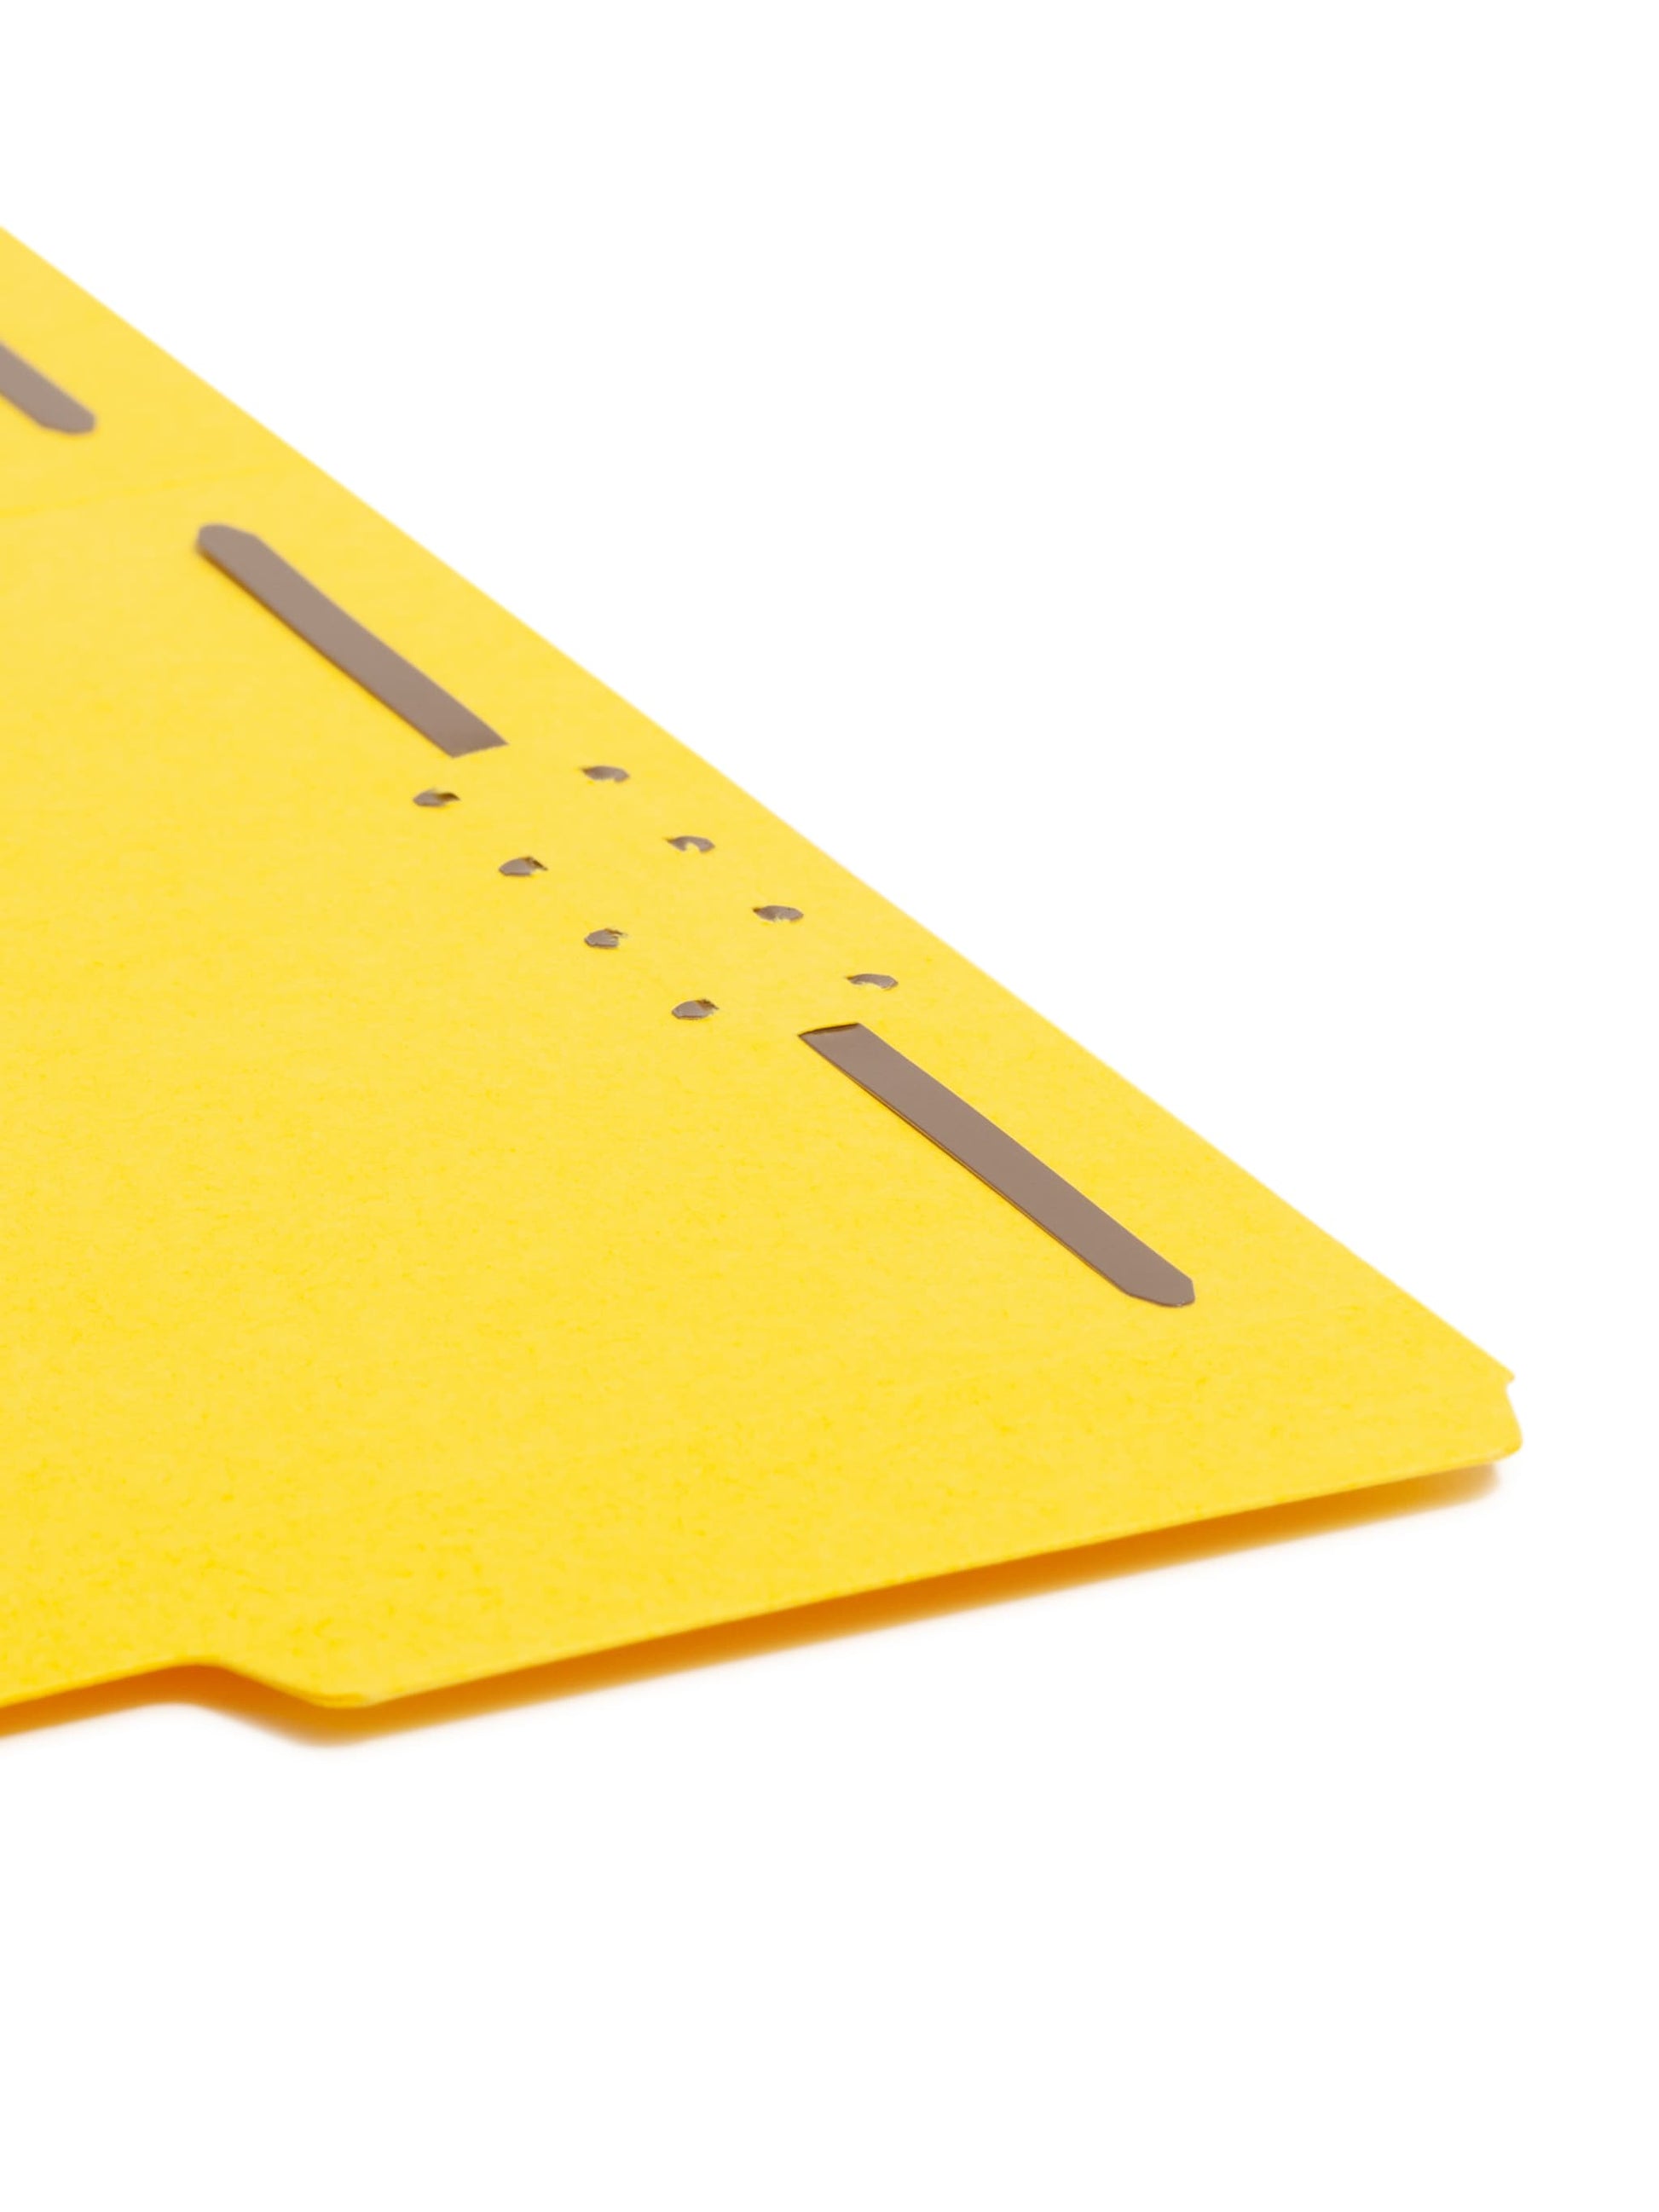 WaterShed®/CutLess® Reinforced Tab Fastener File Folders, Yellow Color, Letter Size, 086486129428